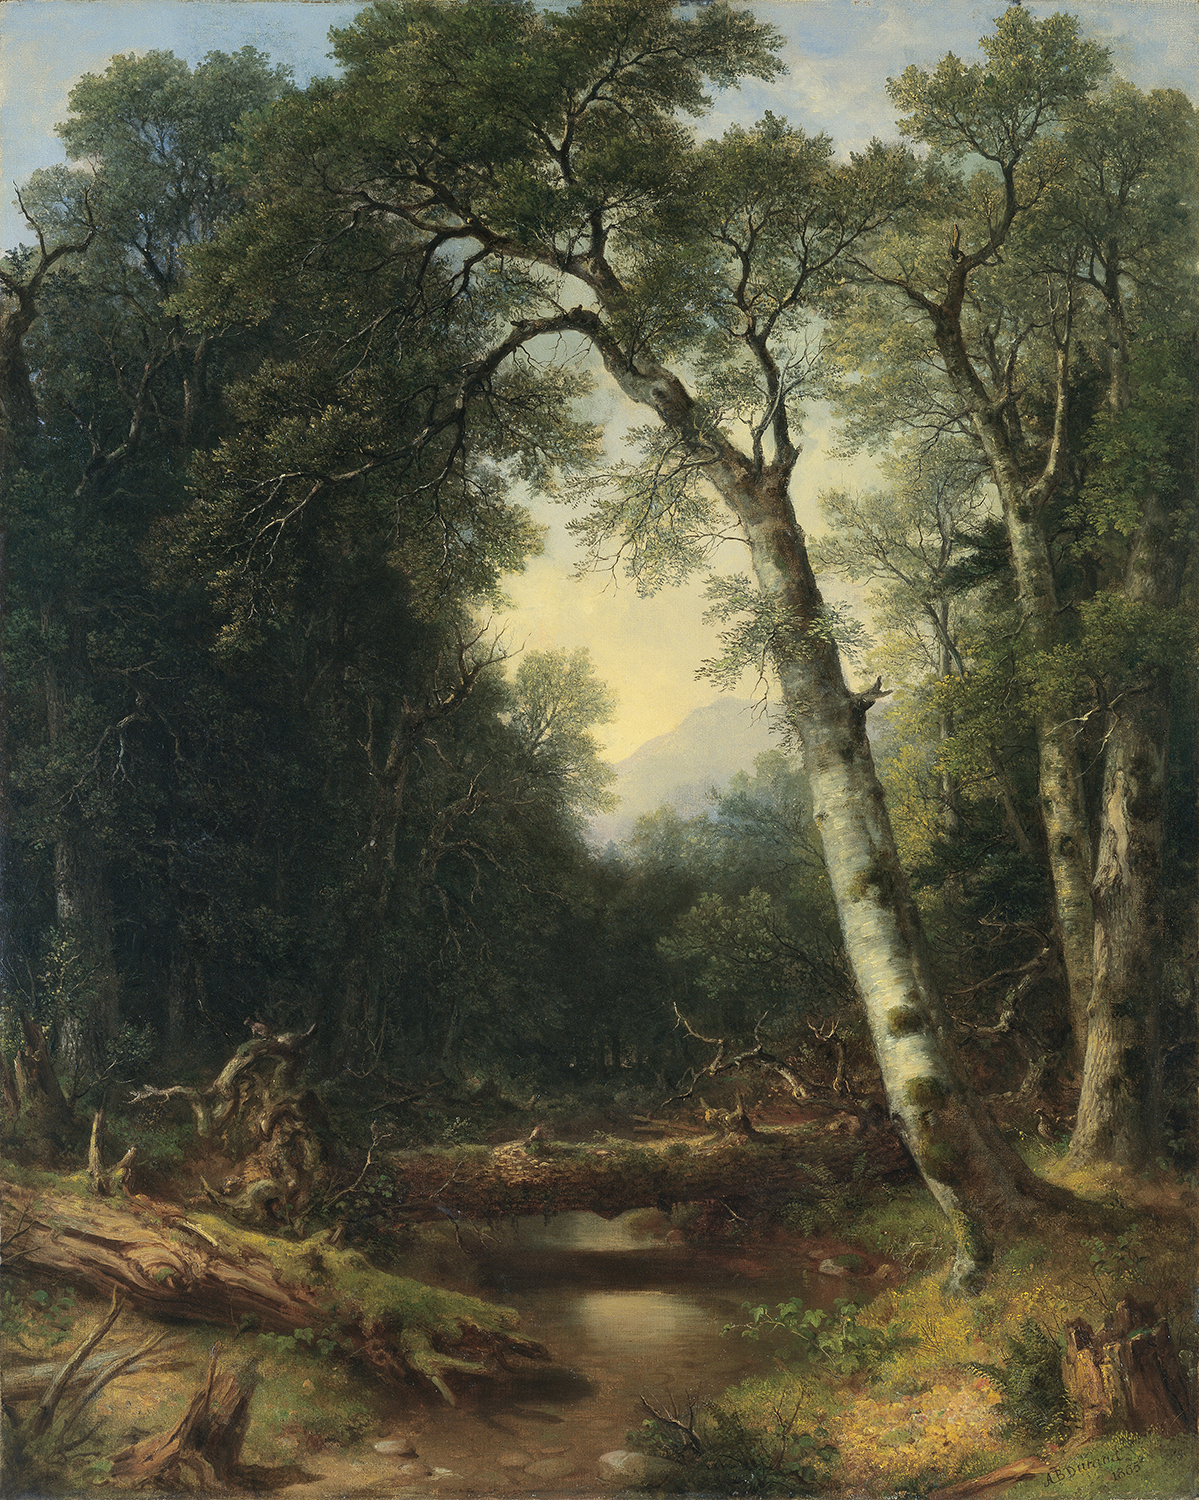 A picturesque scene with a tree with white bark growing on the side of a creek bank in the forest. A mountain is seen in the distance, and through the center flows a creek with clear water and stones on the bottom. Two trees covered in moss have fallen across the creek.